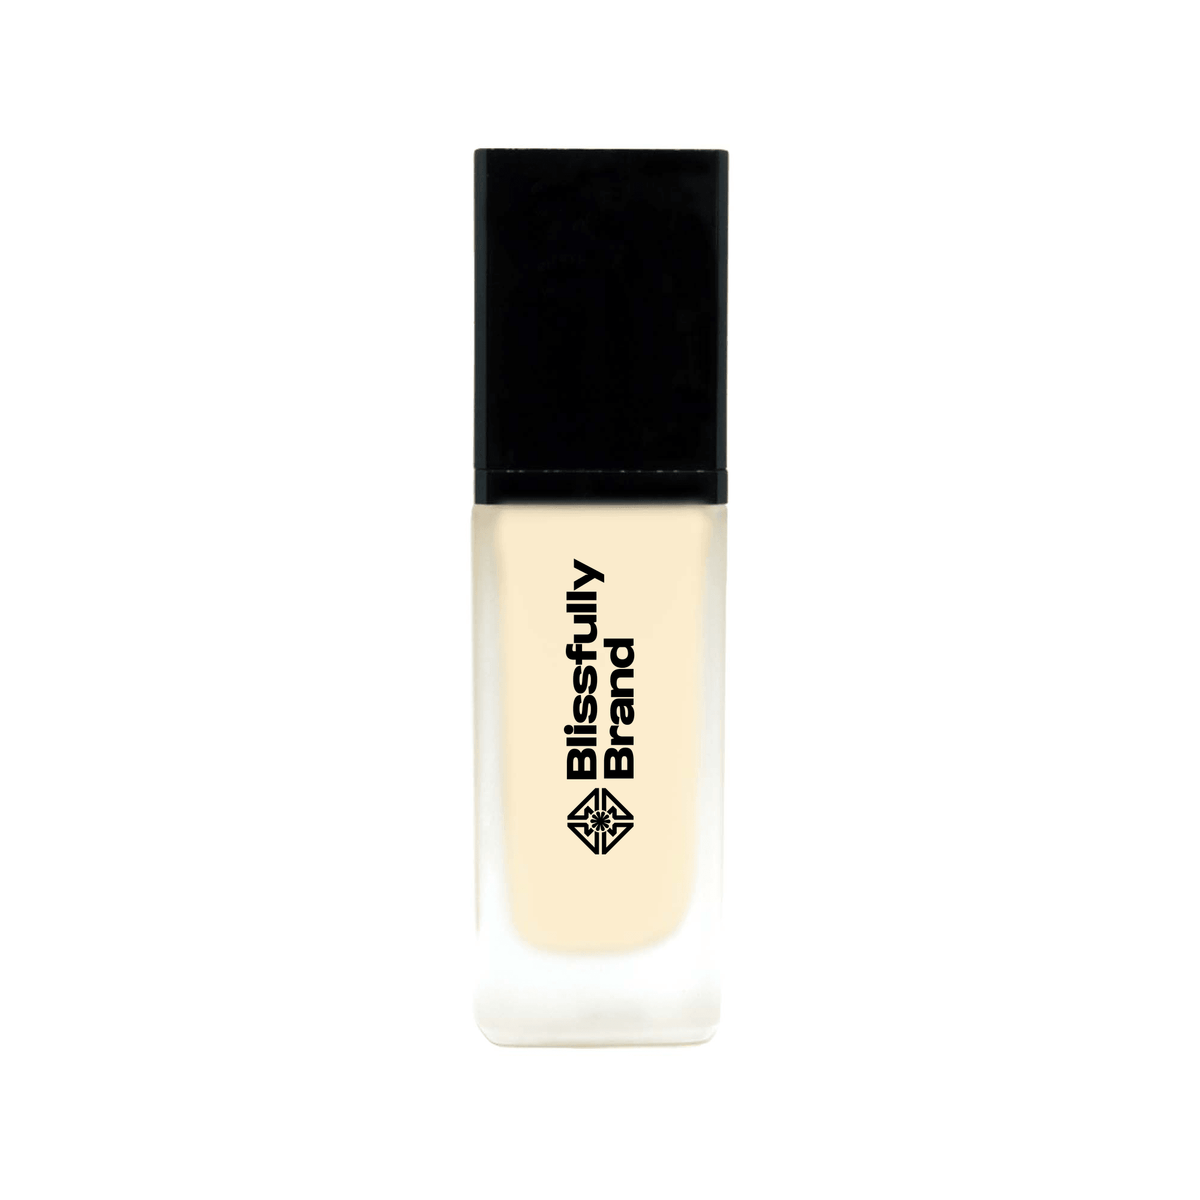 Blissfully Brand Buildable Coverage Foundation - Porcelain Natural Finish